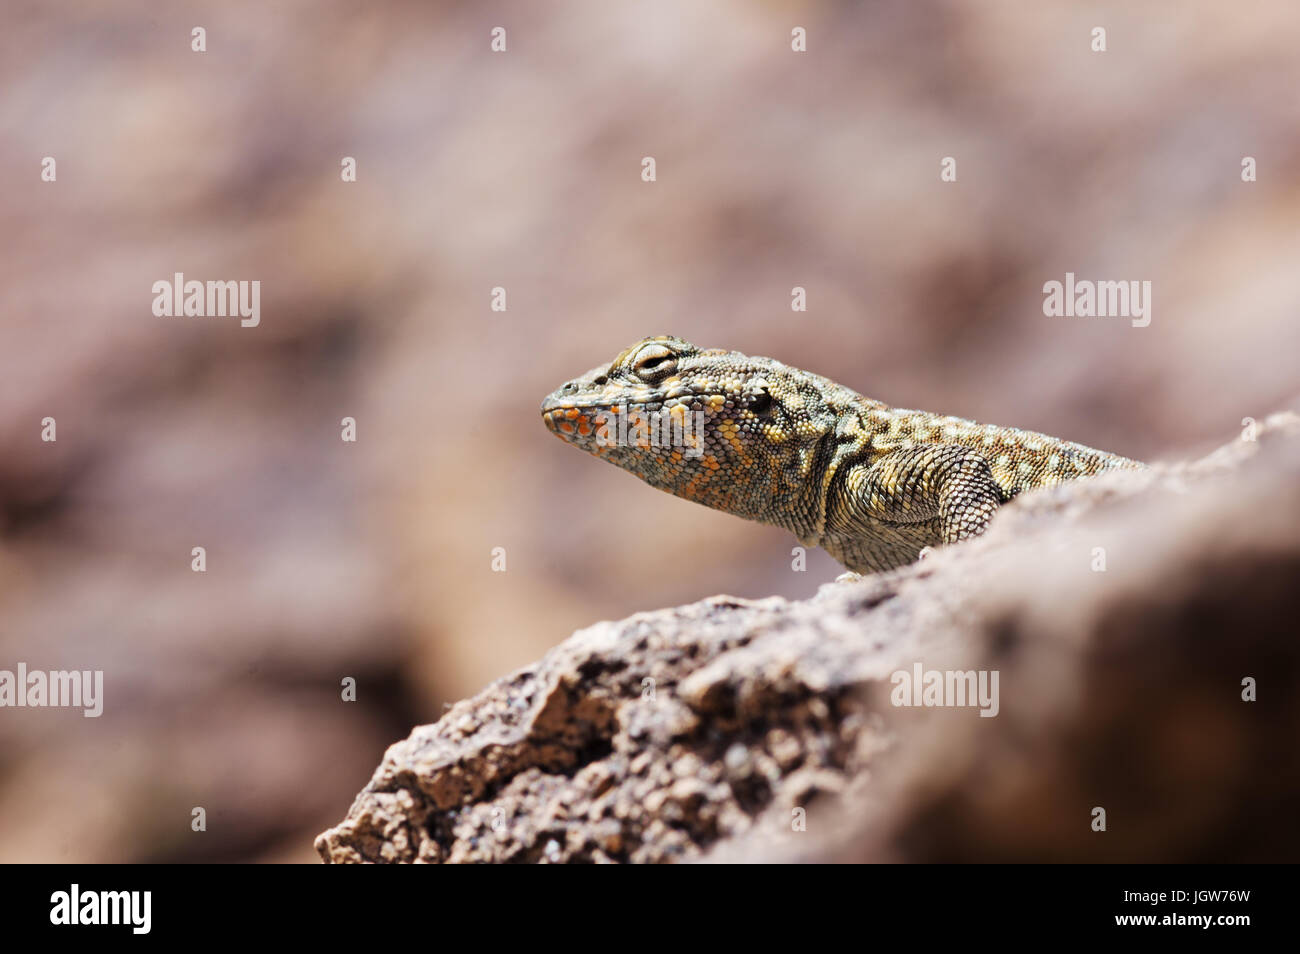 head of the side-blotched lizard on a rock viewed from slightly below with copy space Stock Photo